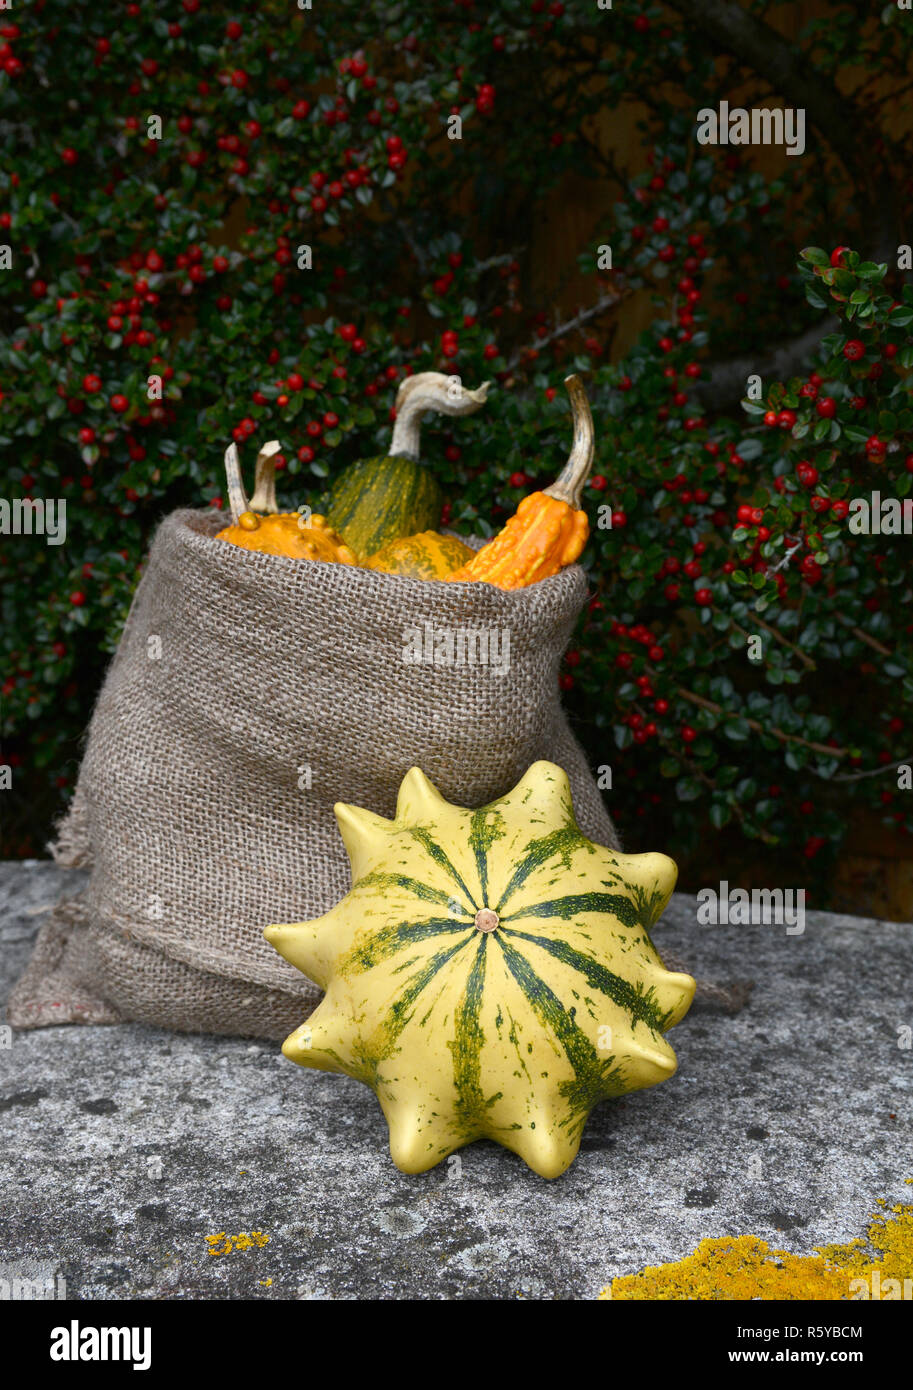 Crown of Thorns gourd with sack of ornamental squashes Stock Photo